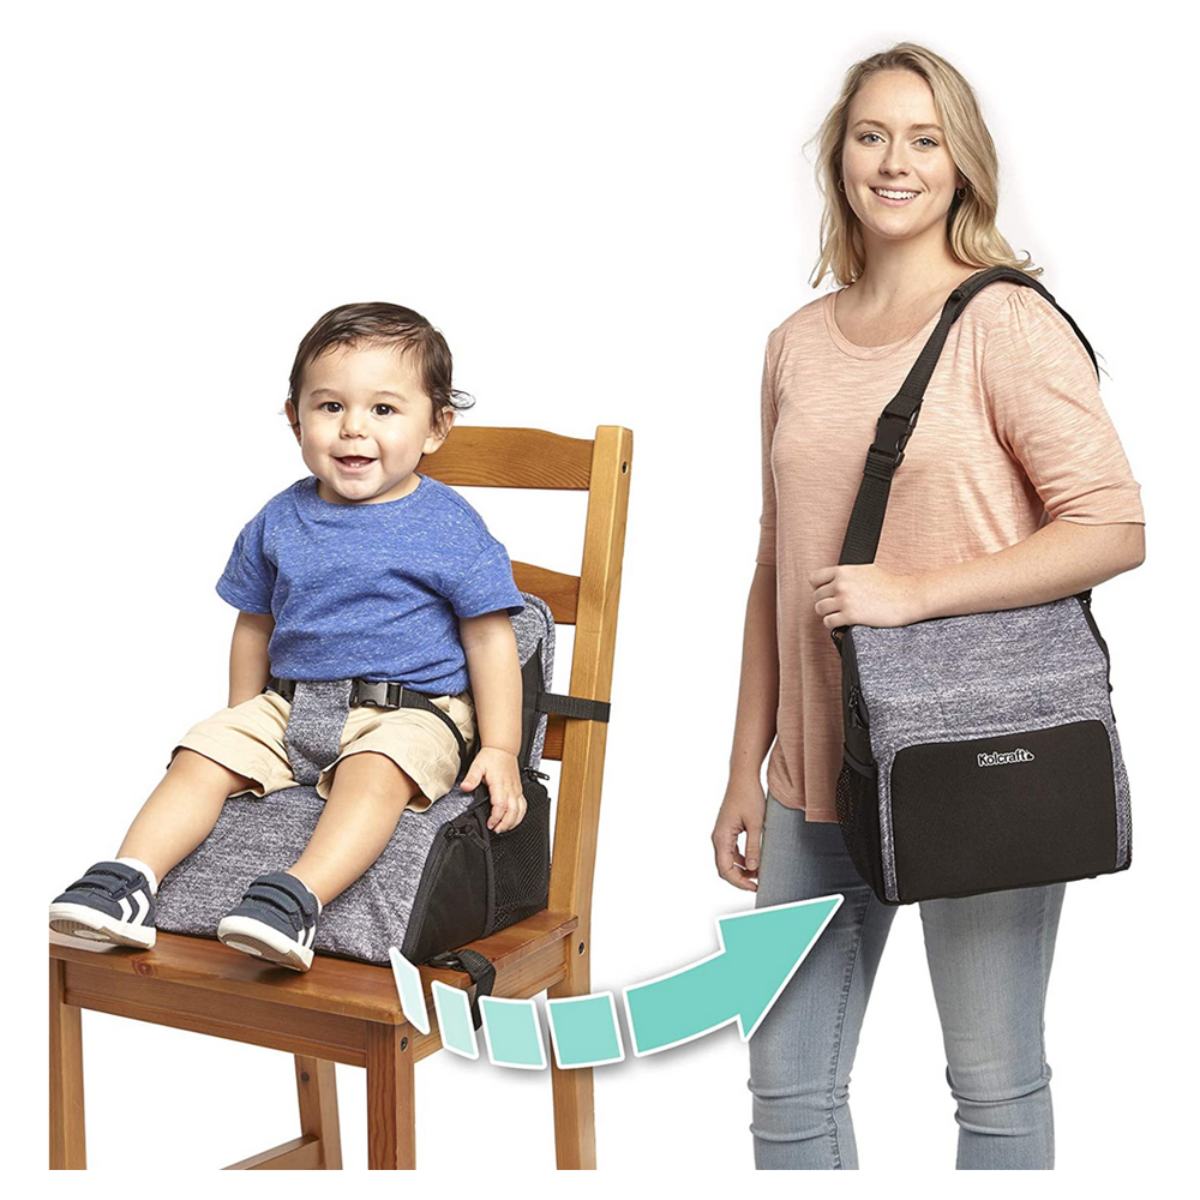 Kolcraft Travel Duo 2 in 1 Portable Booster Seat and Diaper Bag